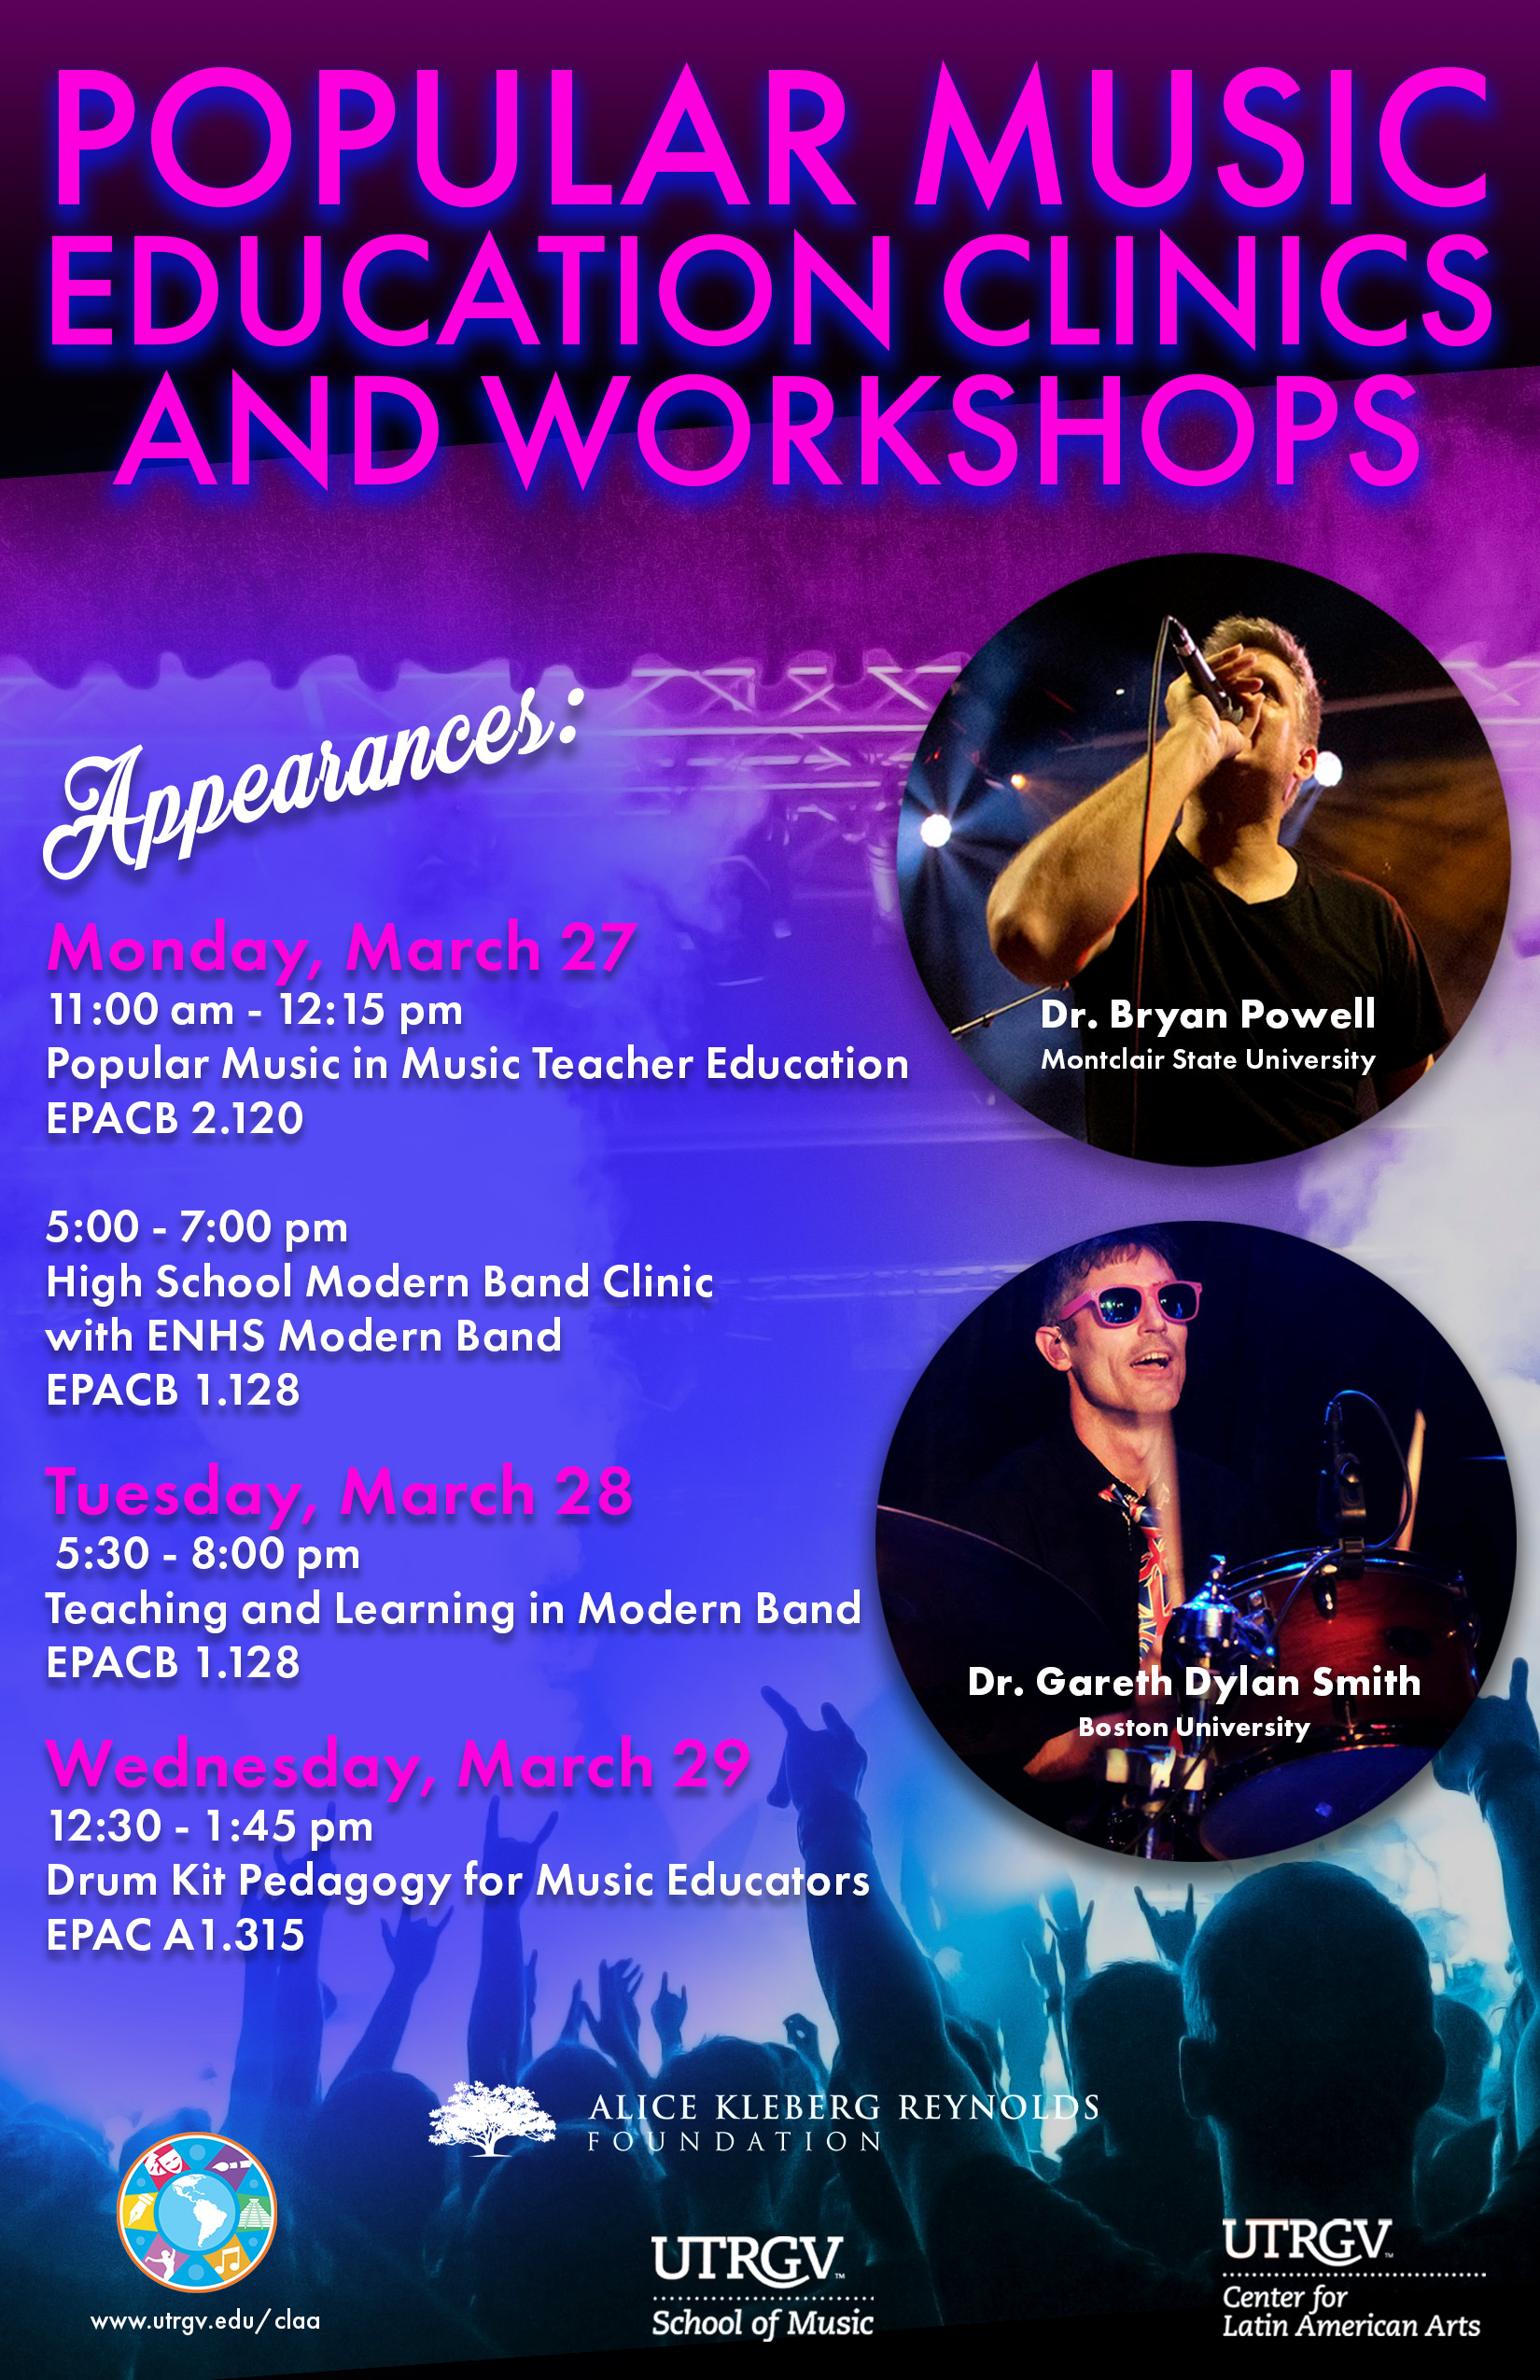 Popular Music Education Clinics and Workshops